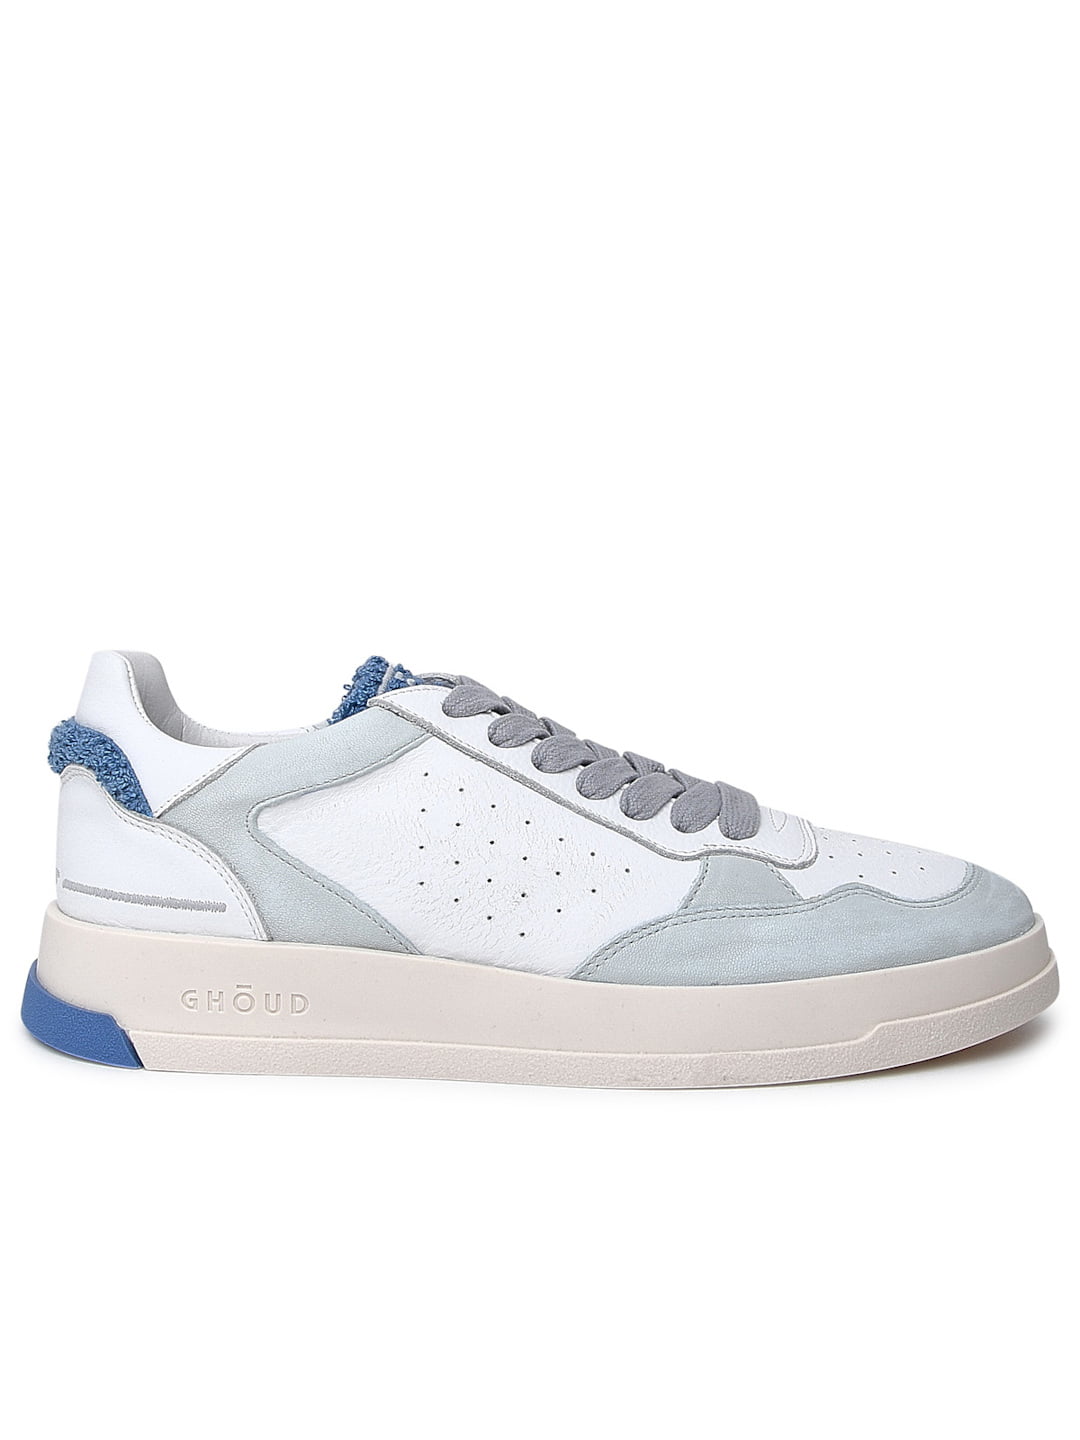 LIGHT BLUE AND WHITE LEATHER TWEENER SNEAKERS - Walmart.com